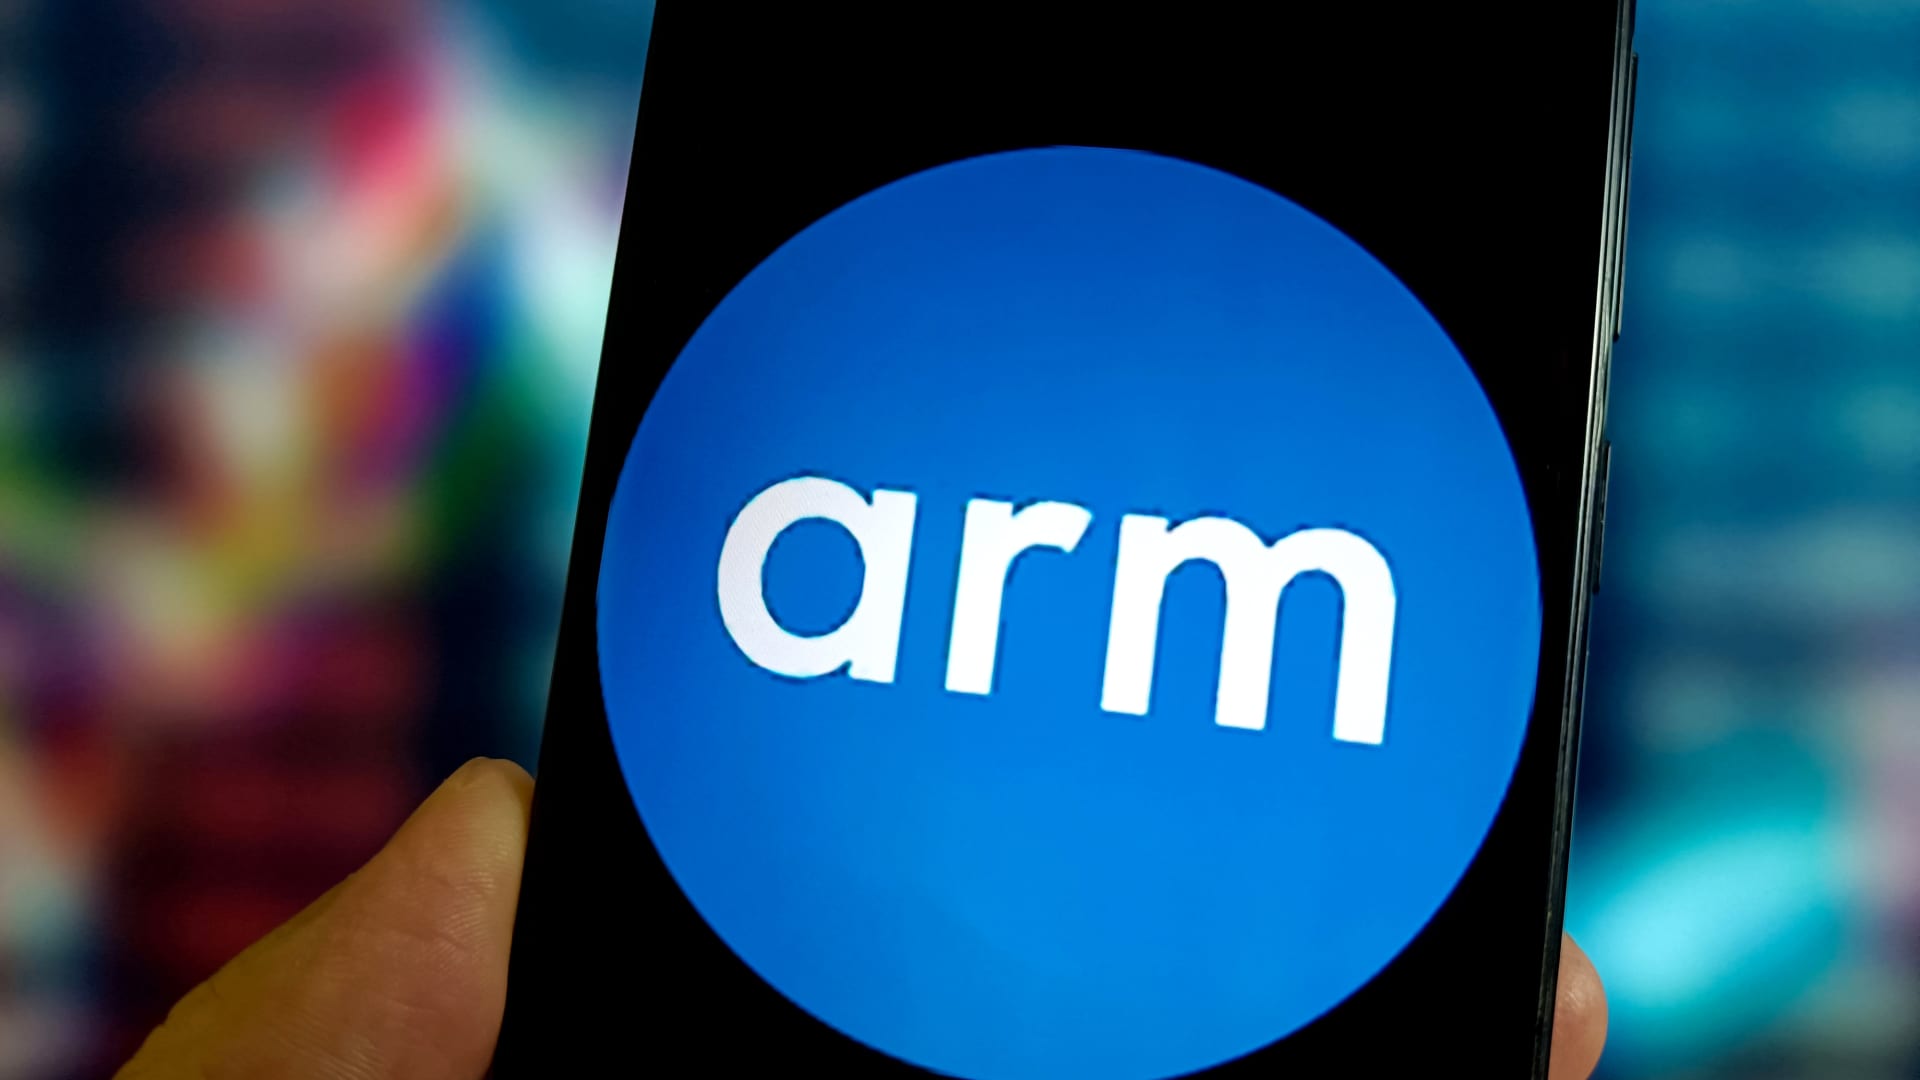 SoftBank plans to list Arm in the U.S.